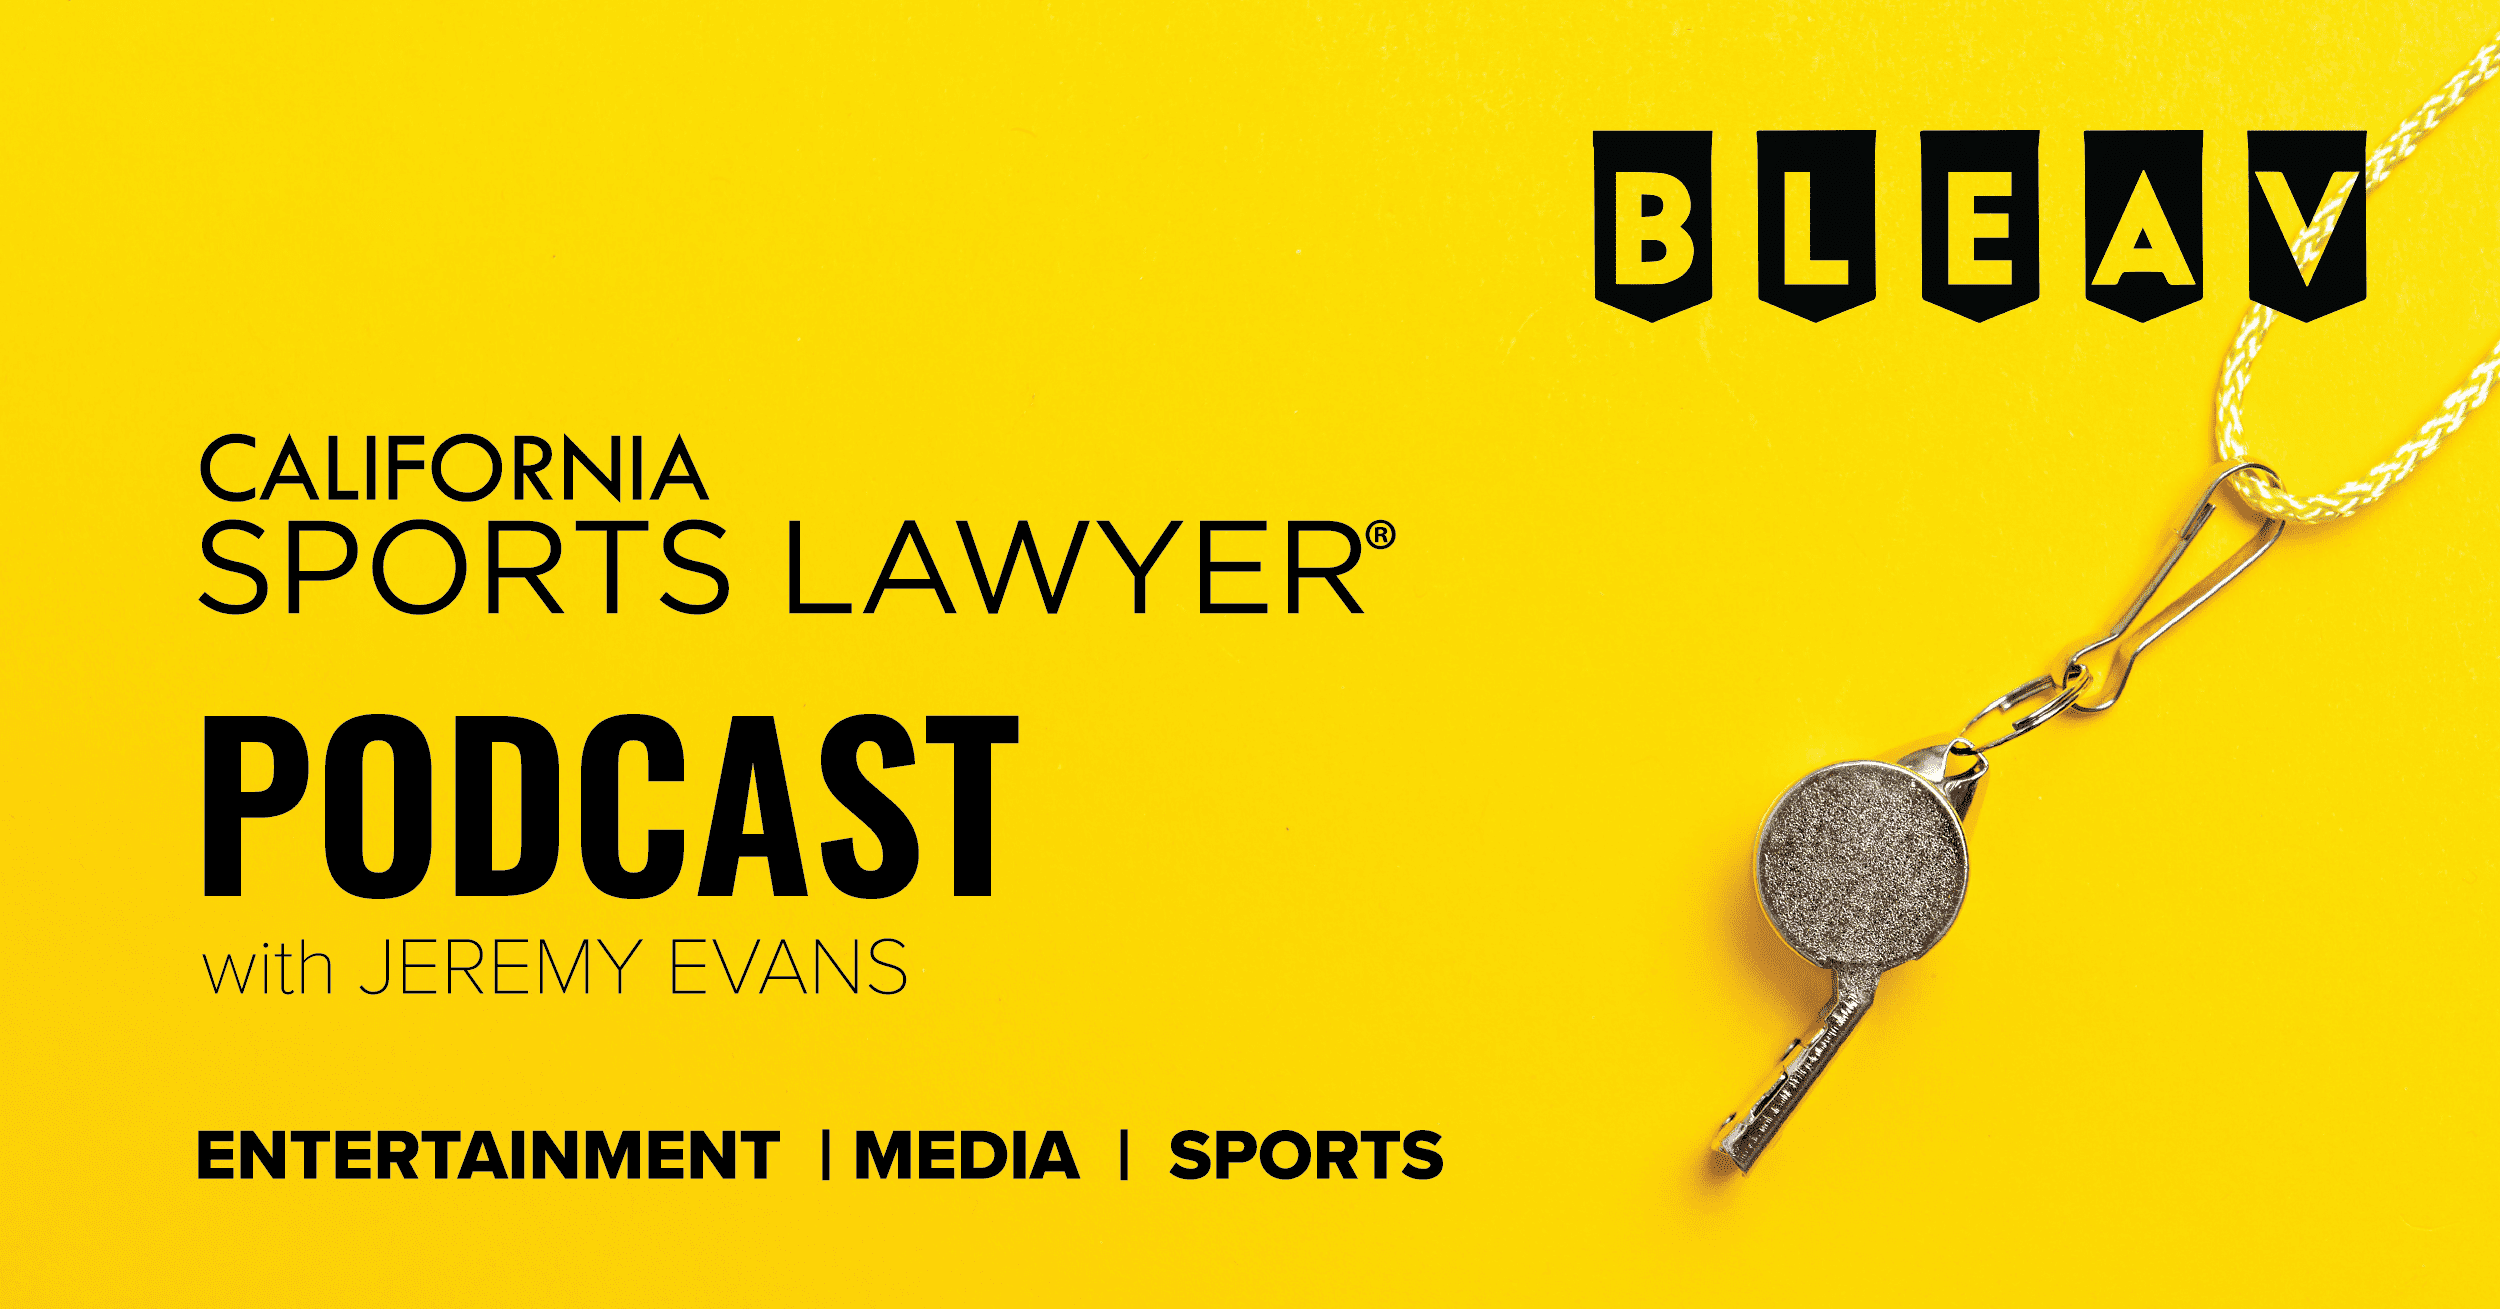 California Sports Lawyer® Podcast with Jeremy Evans: NCAA and Athletes Settlement Will Change College Landscape